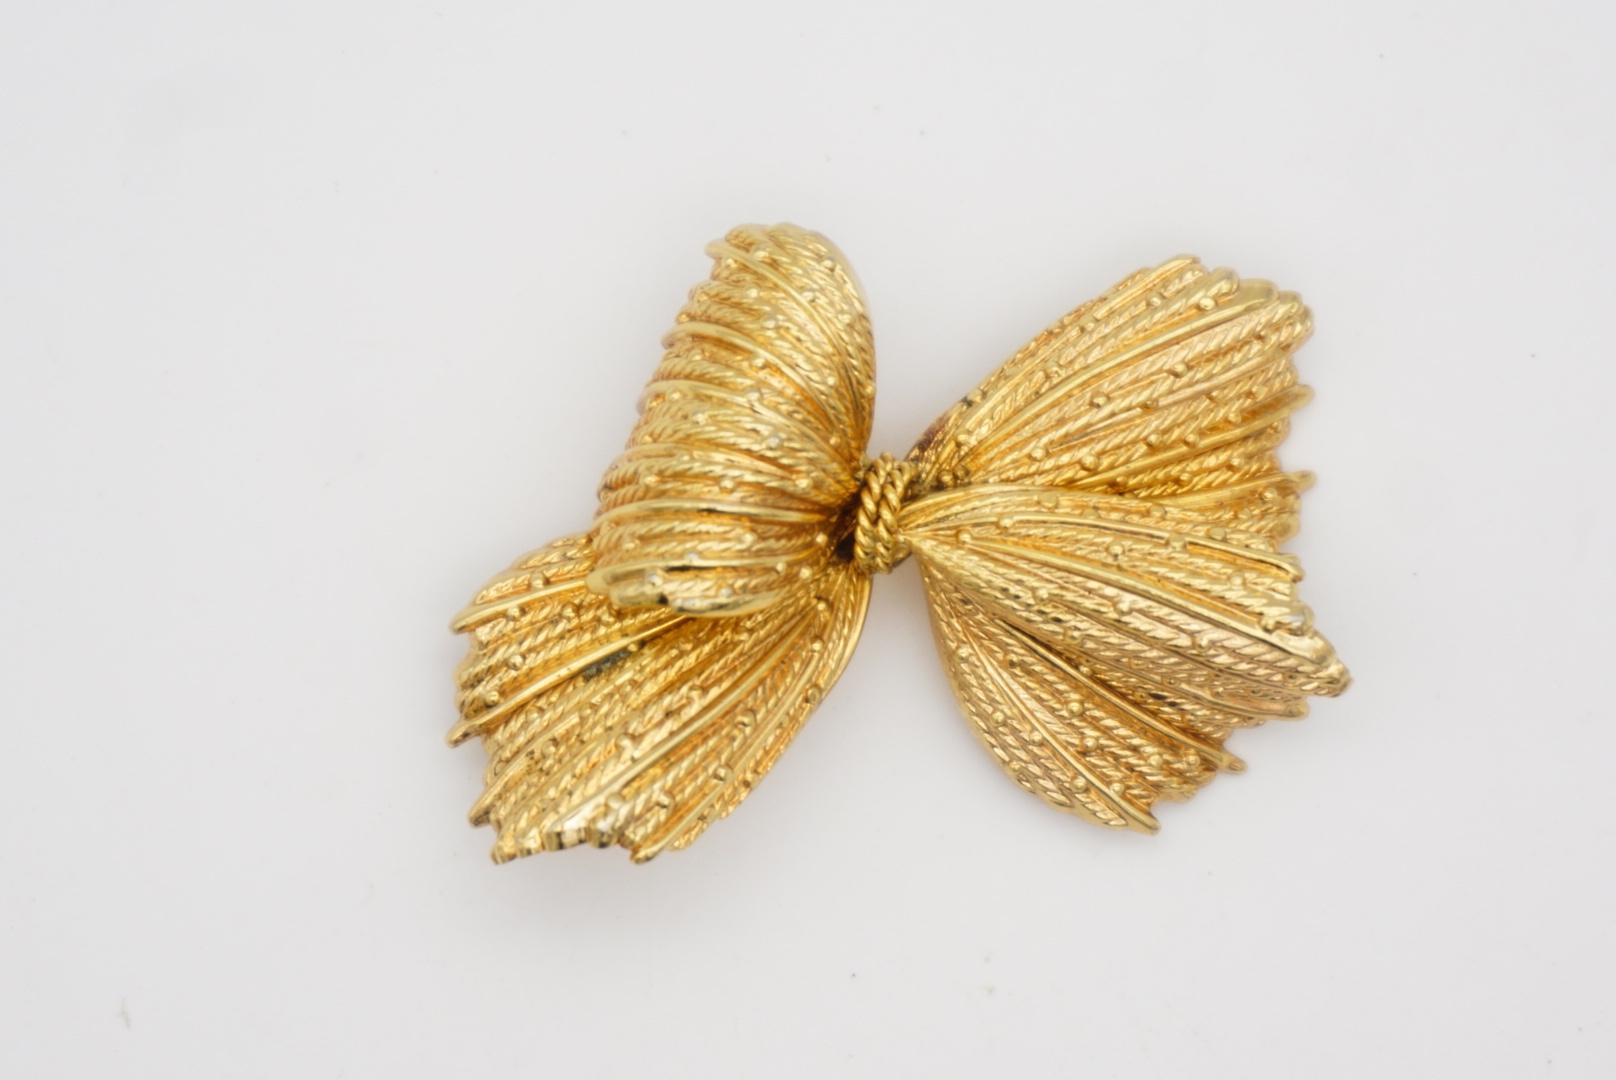 Christian Dior GROSSE 1966 Vintage Large Knot Bow Dots Ribbon Butterfly Brooch In Good Condition For Sale In Wokingham, England